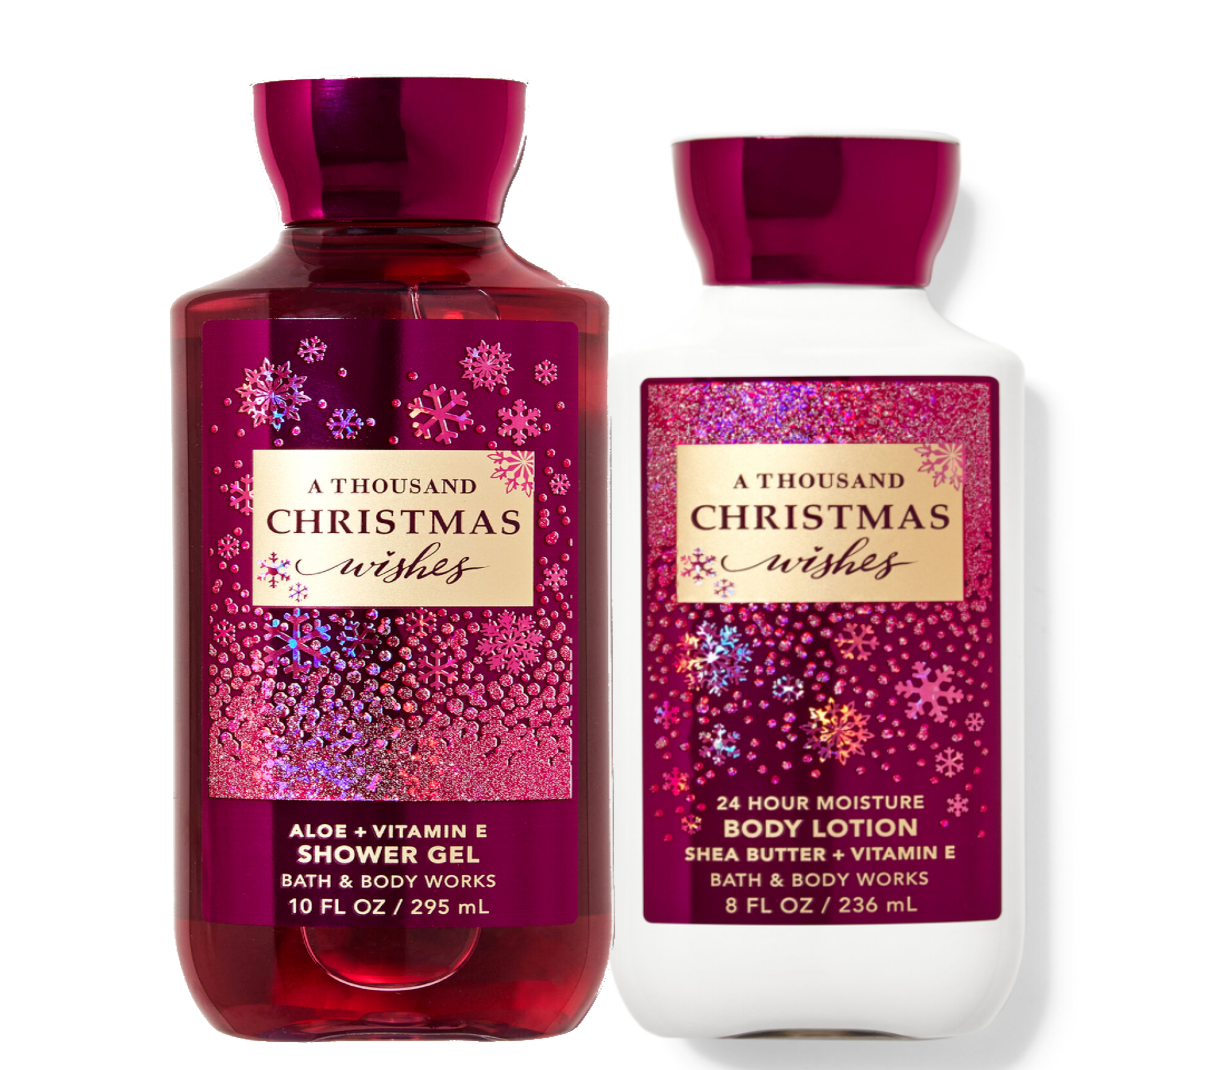 Primary image for Bath & Body Works A Thousand Christmas Wishes Body Lotion + Shower Gel Duo Set